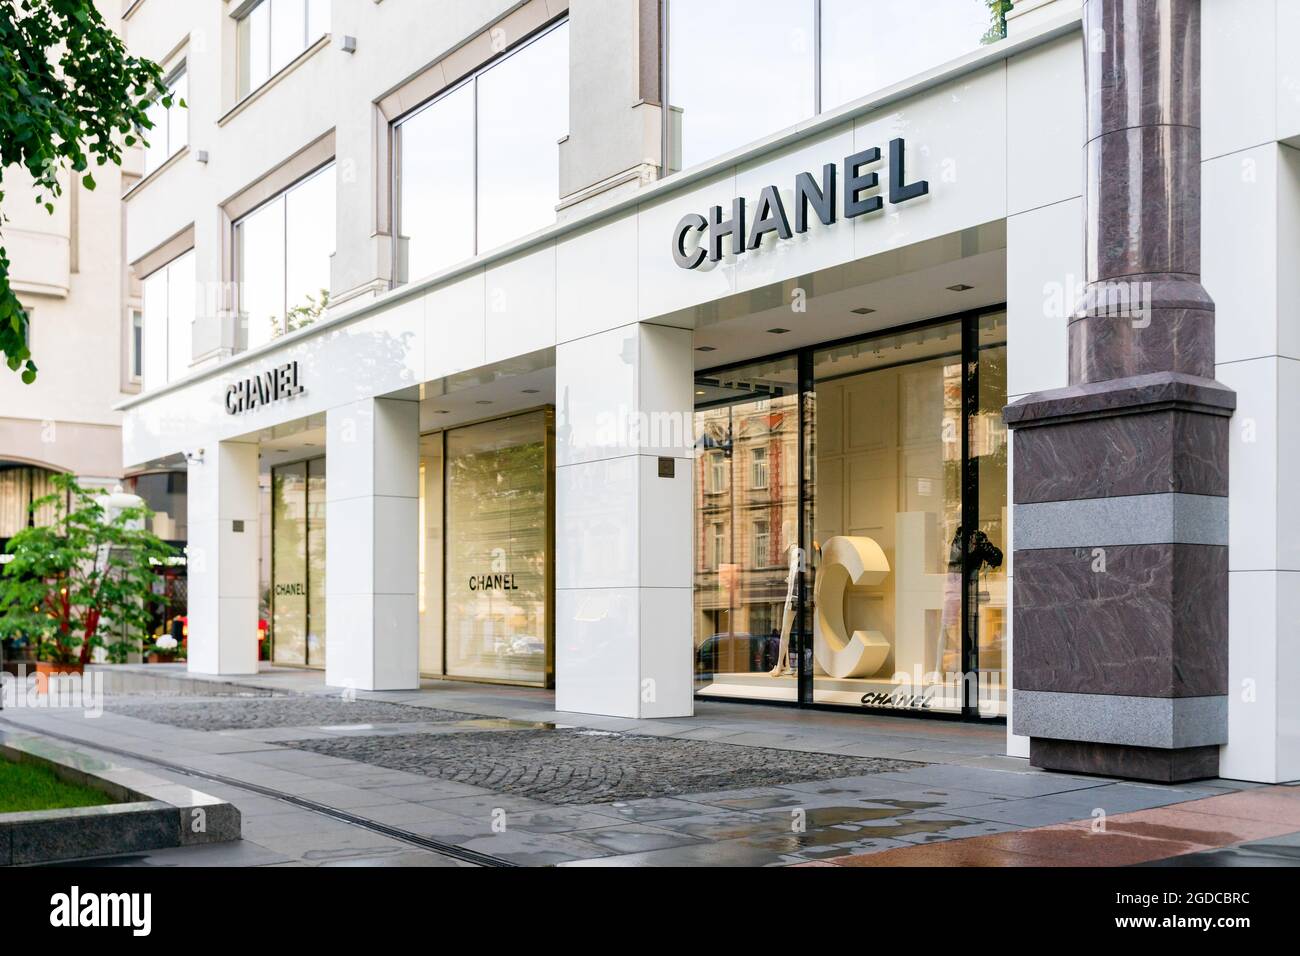 Chanel store front, petrovka 7, Moscow, Russia Photo -